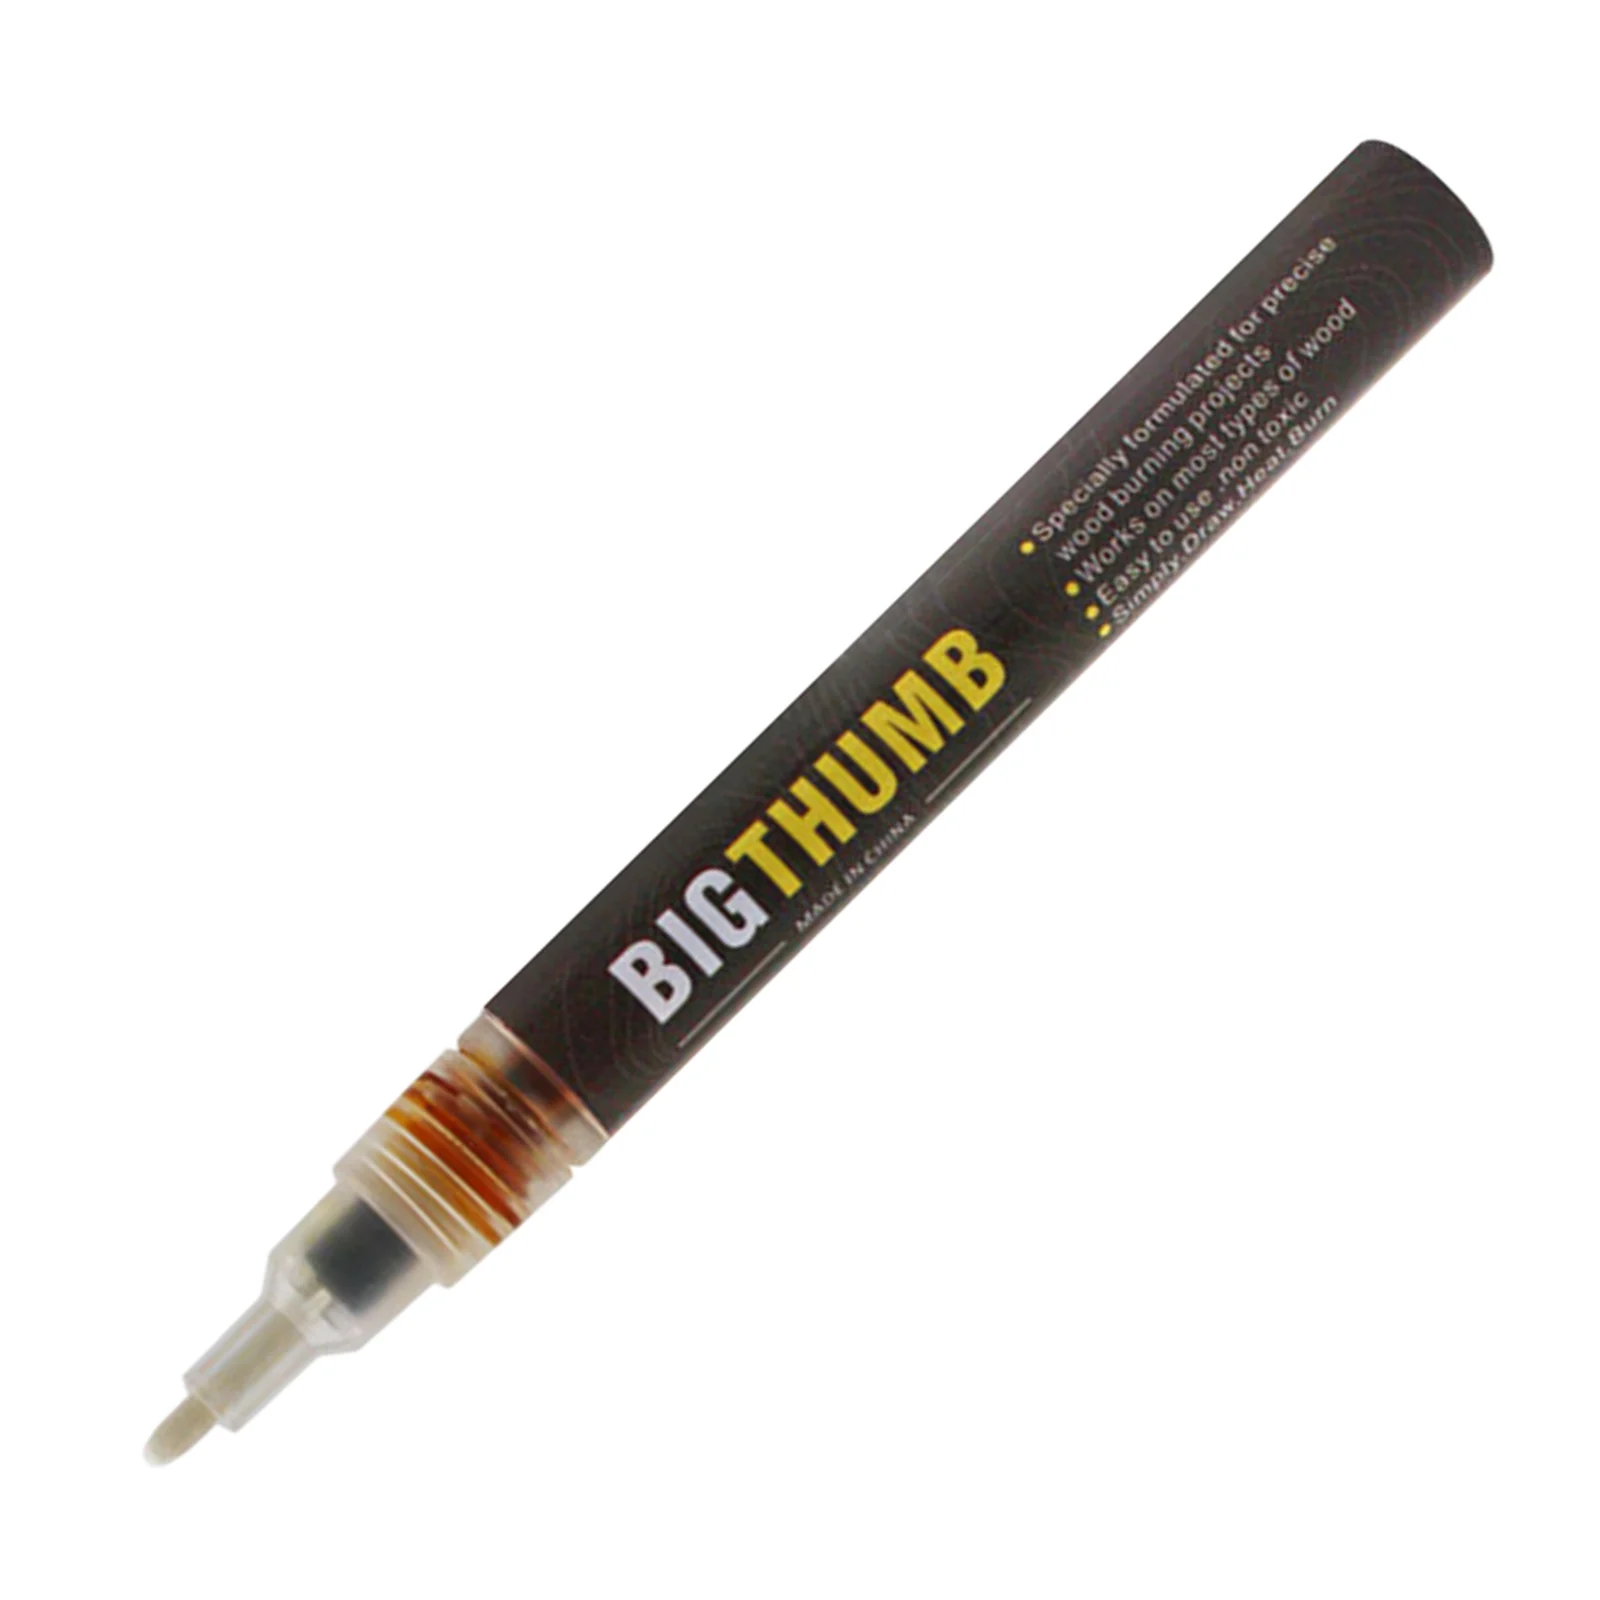 Wood Burning Pen Scorch Burned Marker Pyrography Pens for DIY Projects Wood Crafts